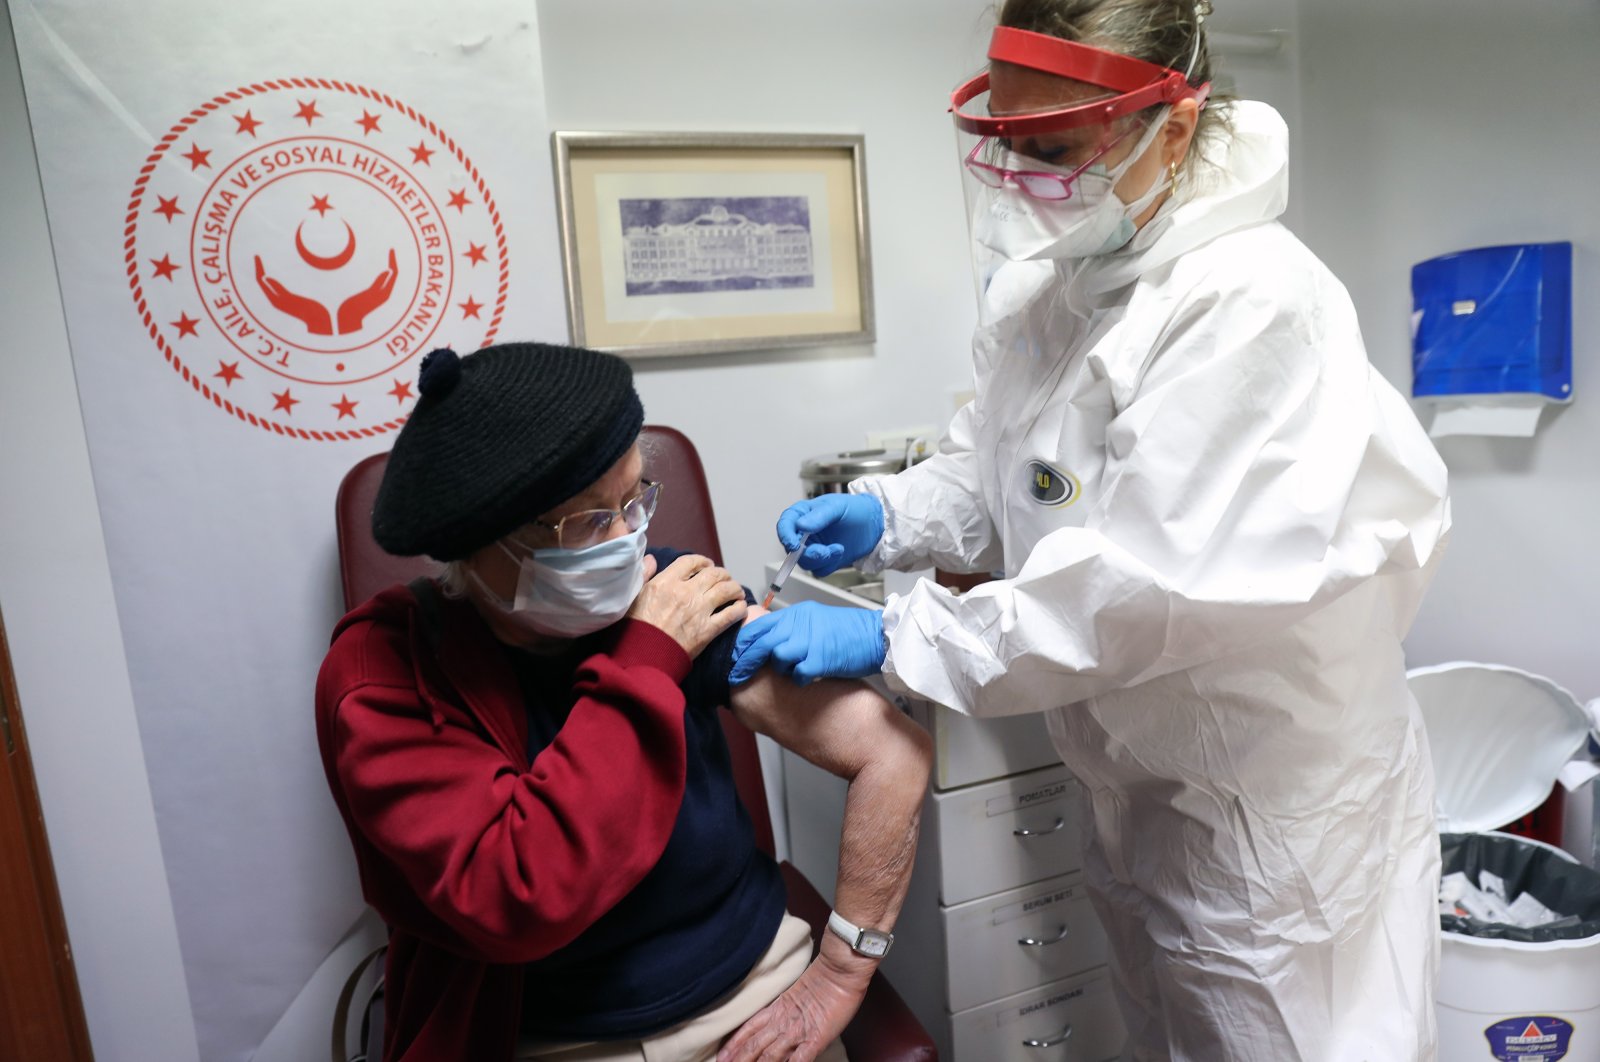 An elderly woman receives an injection of the CoronaVac vaccine at a nursing home in the capital Ankara, Turkey, Jan. 19, 2021. (AFP Photo)